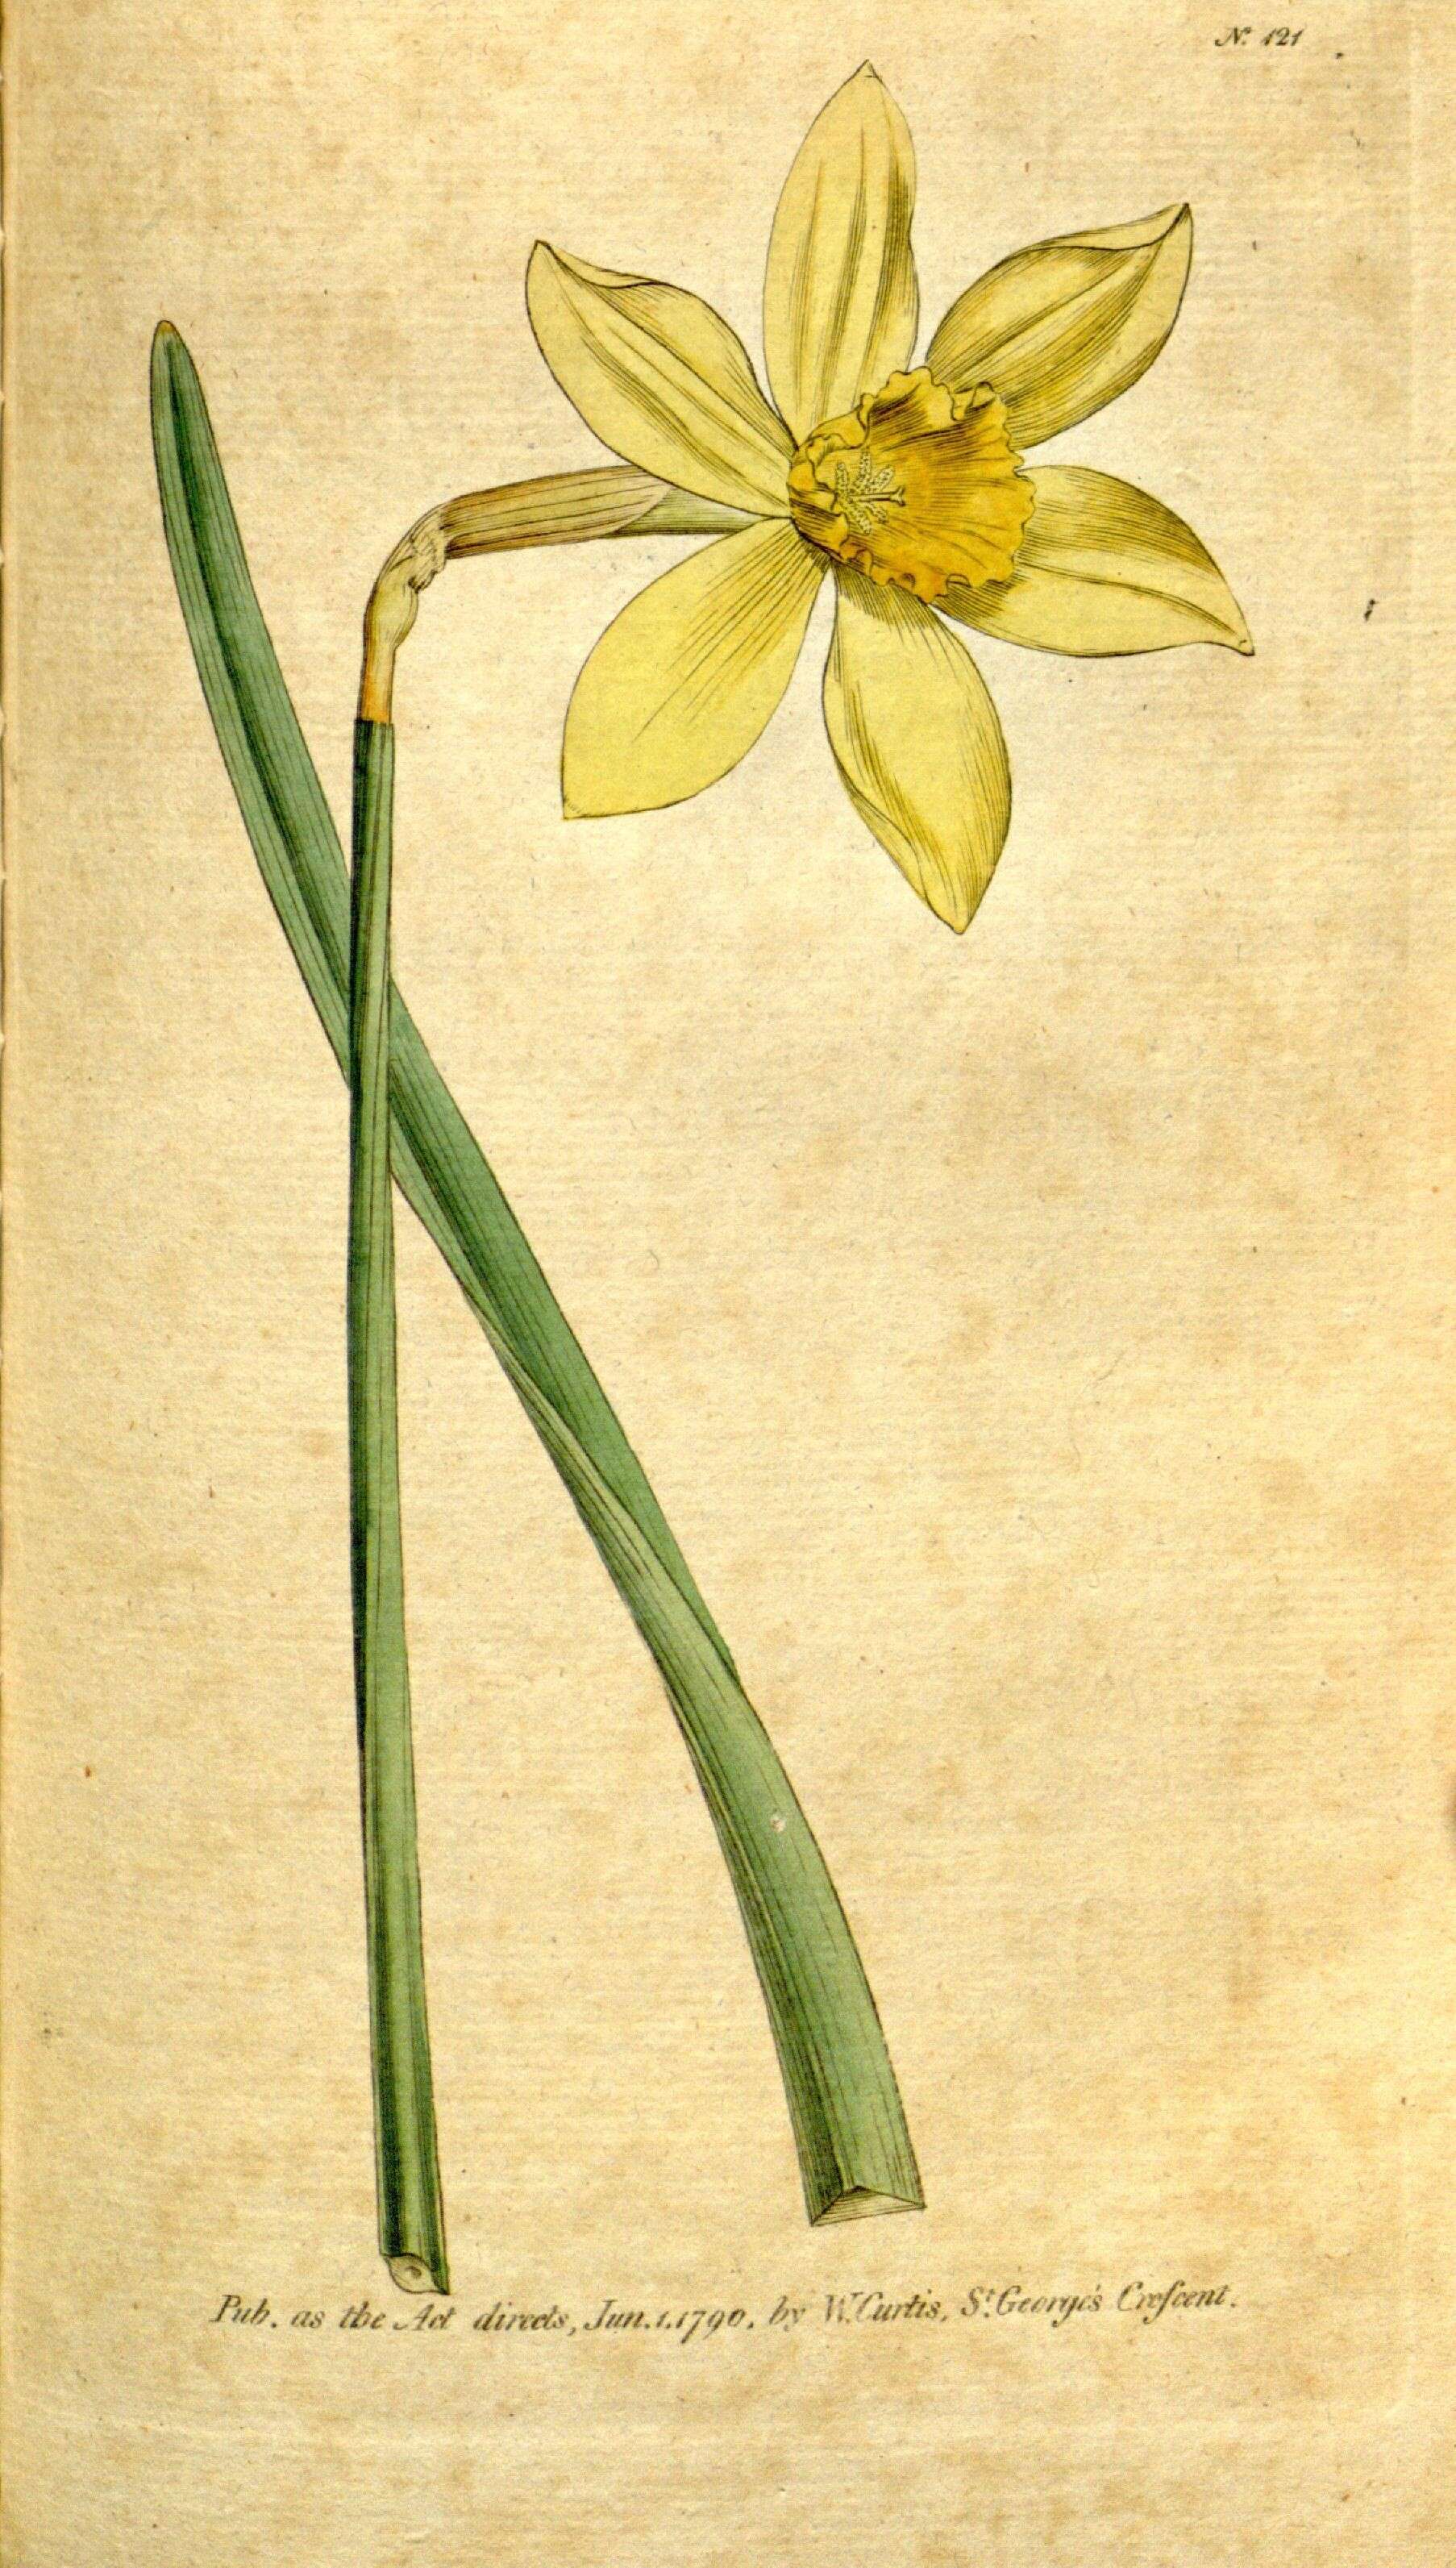 Image of nonesuch daffodil